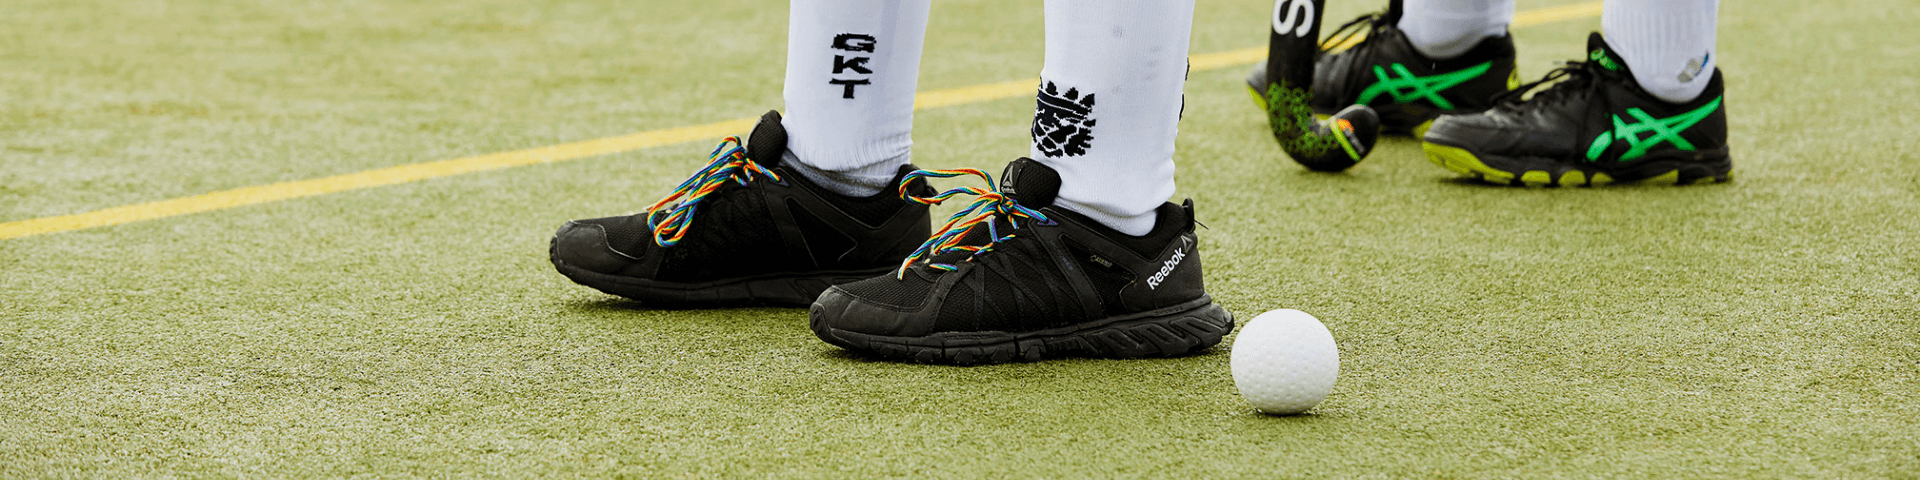 Sports person wears Rainbow Laces in black boots on a playing field